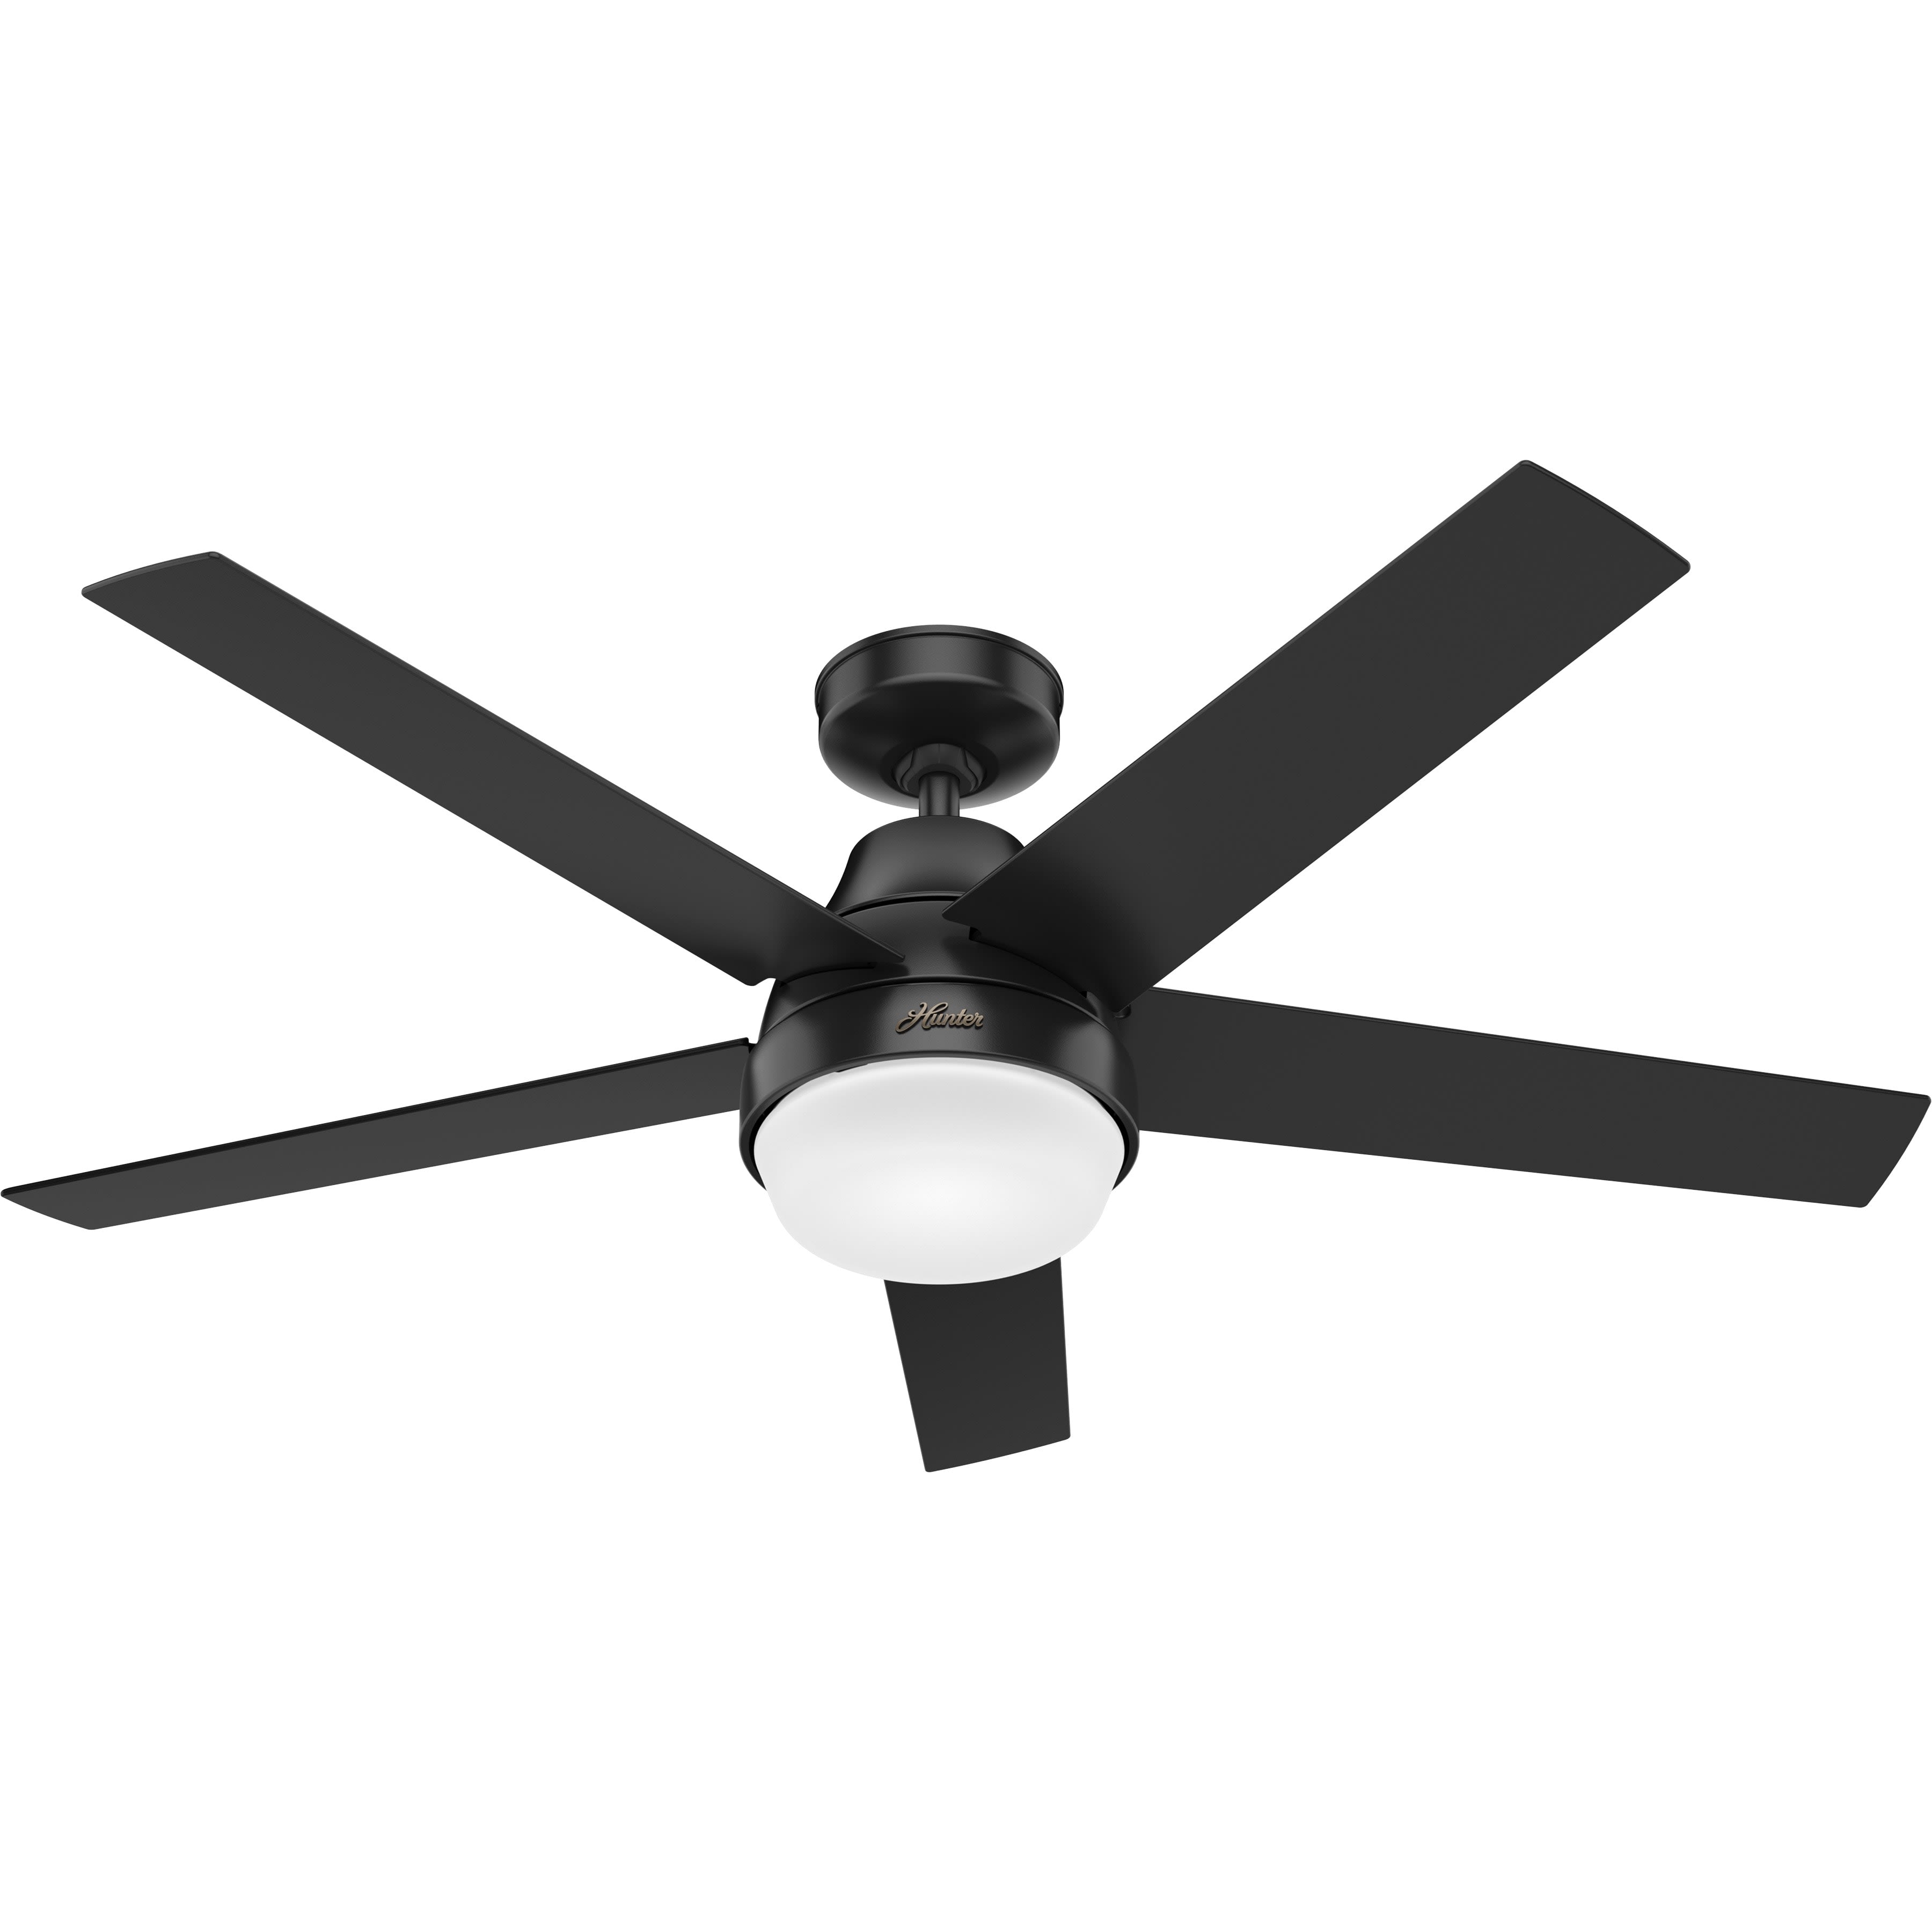 Aerodyne smart ceiling fan with SIMPLEconnect